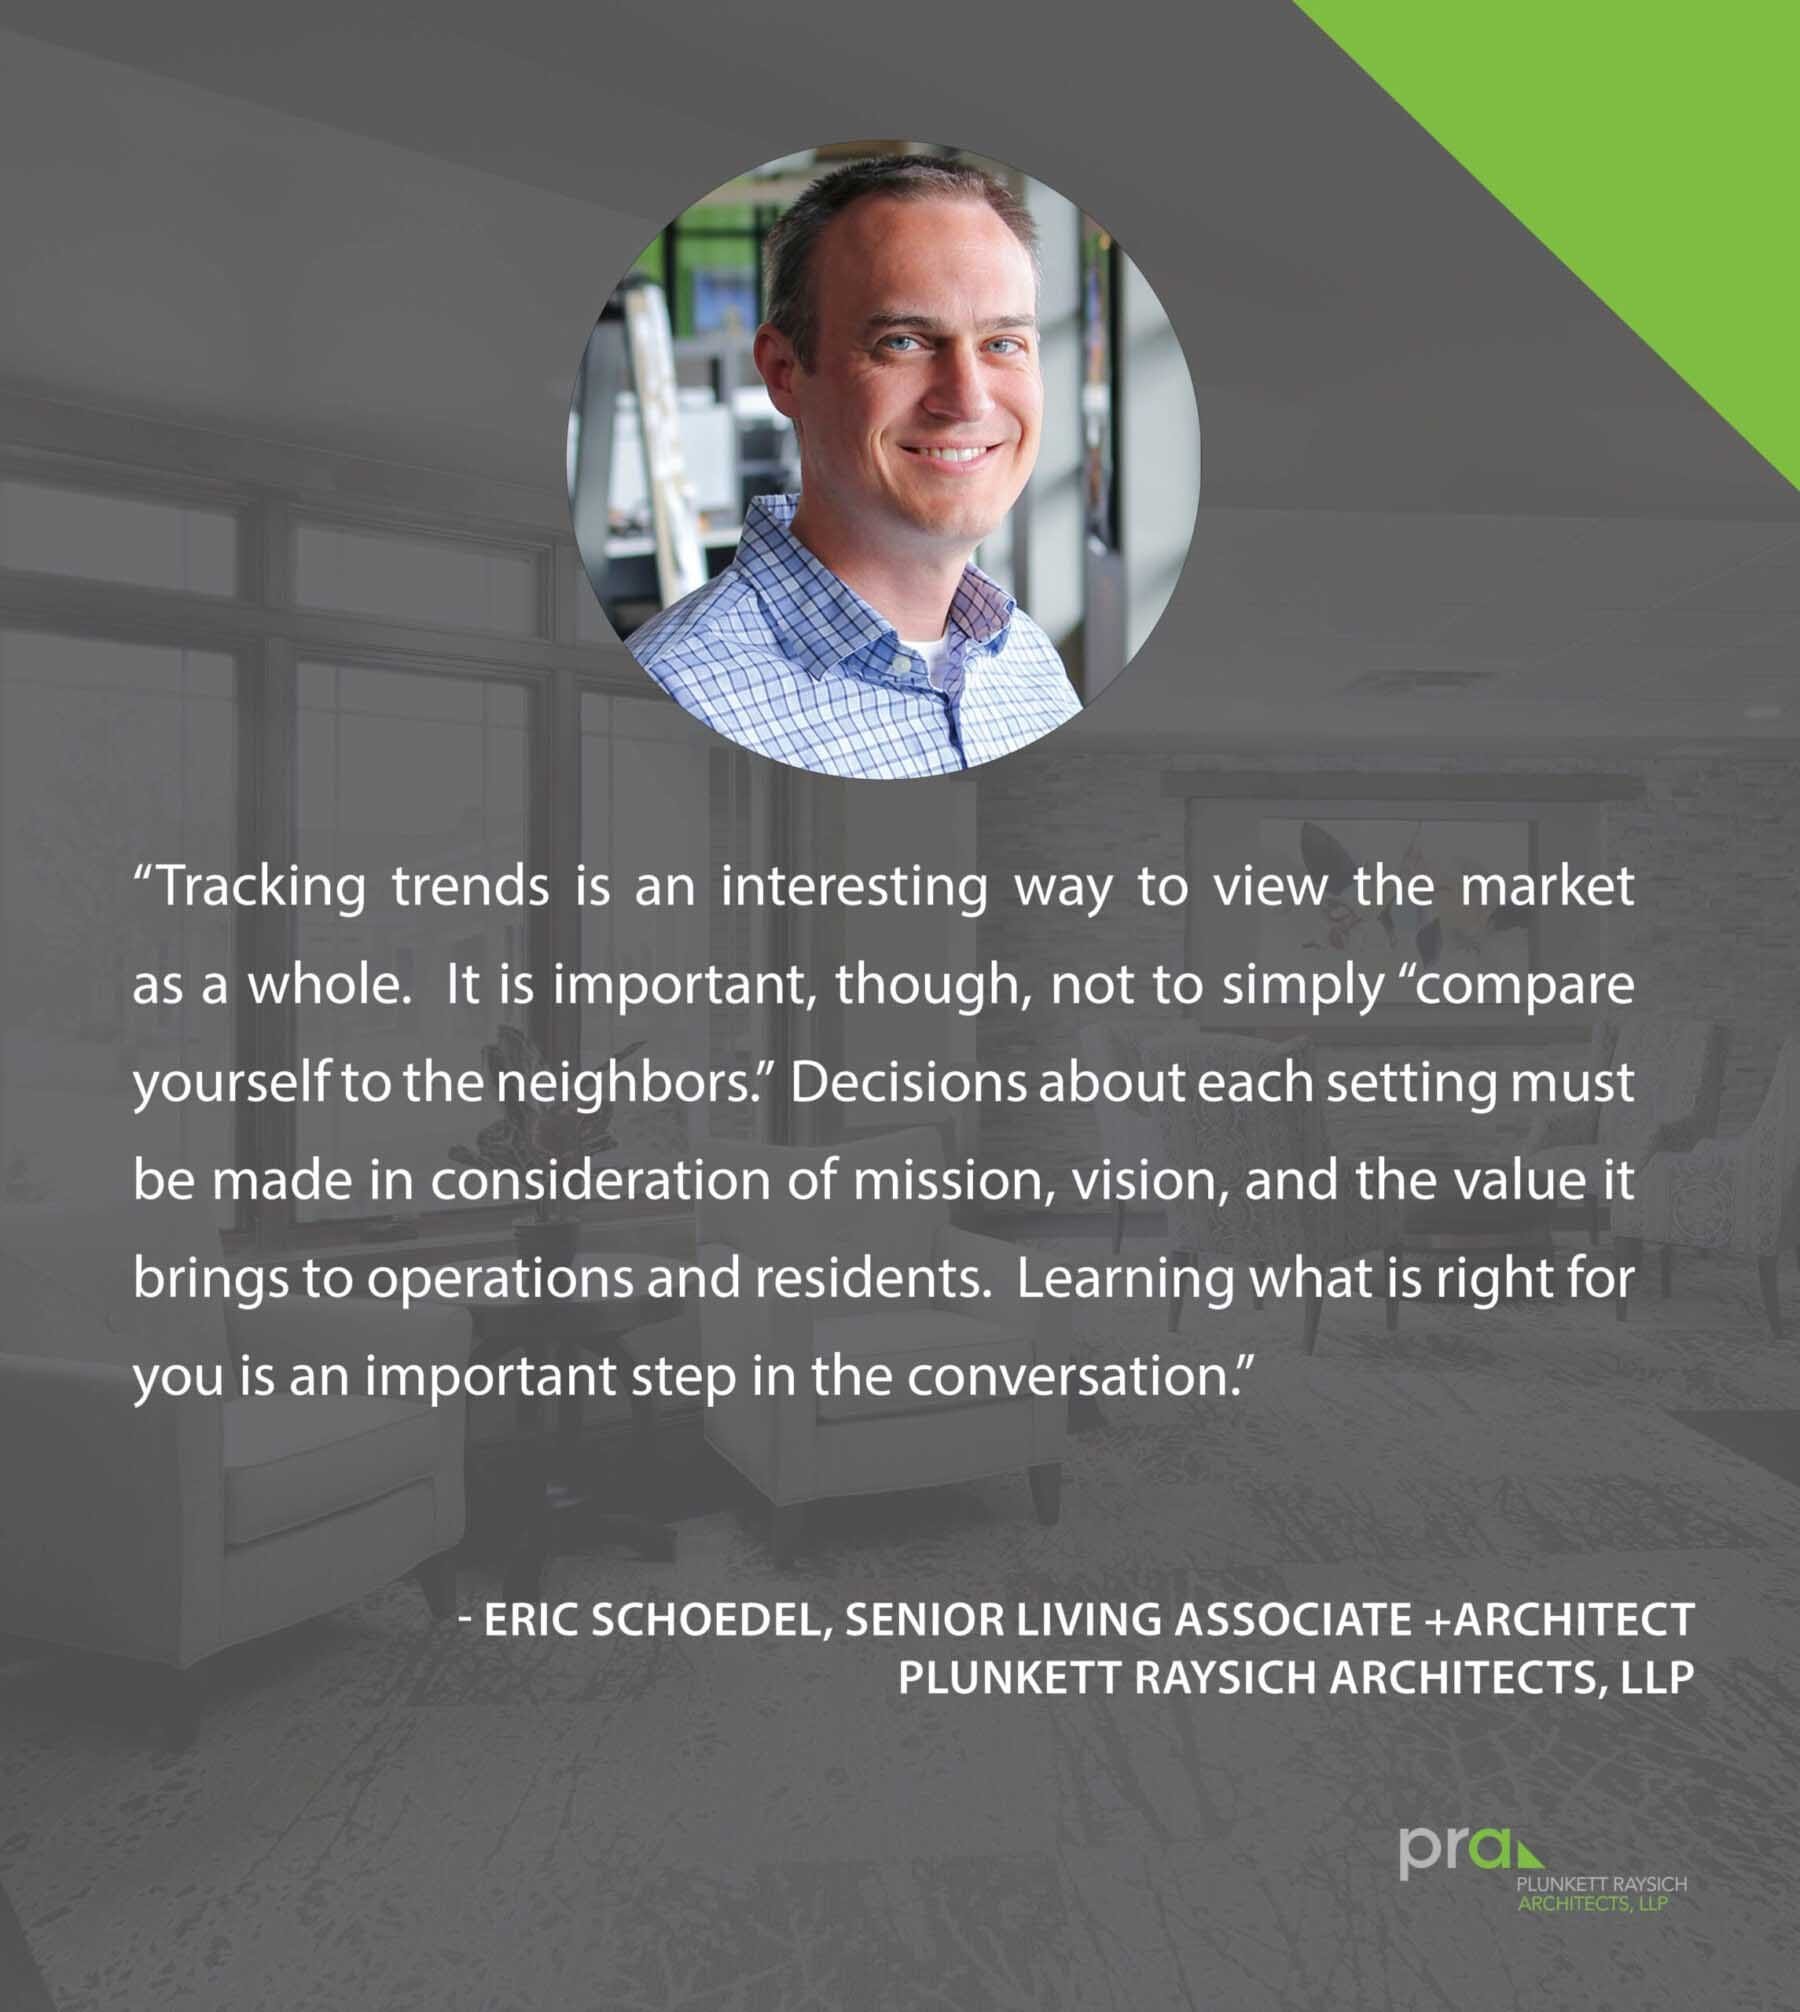 Eric Schoedel is quoted about tracking senior living design trends